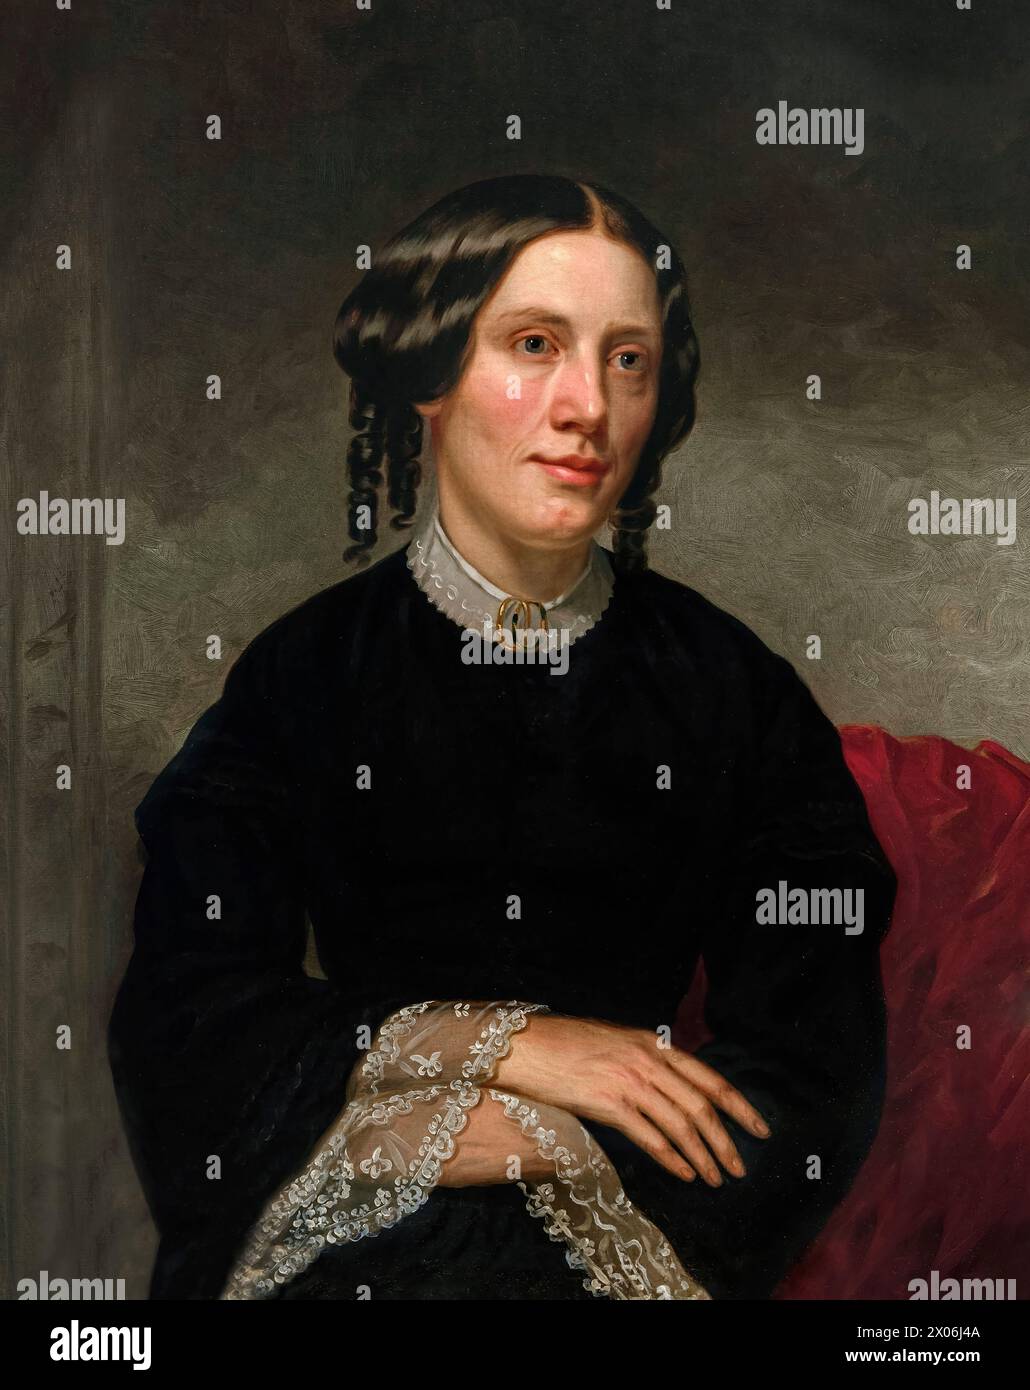 Harriet Beecher Stowe (1811-1896) portrait by Alanson Fisher (1807-1884) painted in 1853 a year after the publication of her seminal anti-slavery novel of 'Uncle Tom's Cabin that did much to progress the abolitionist cause in 1850s. The original portrait is oval and this version was digitally expanded to fit a rectangular exhibition space. Credit: National Portrait Gallery, Smithsonian Institution / Contraband Collection Stock Photo